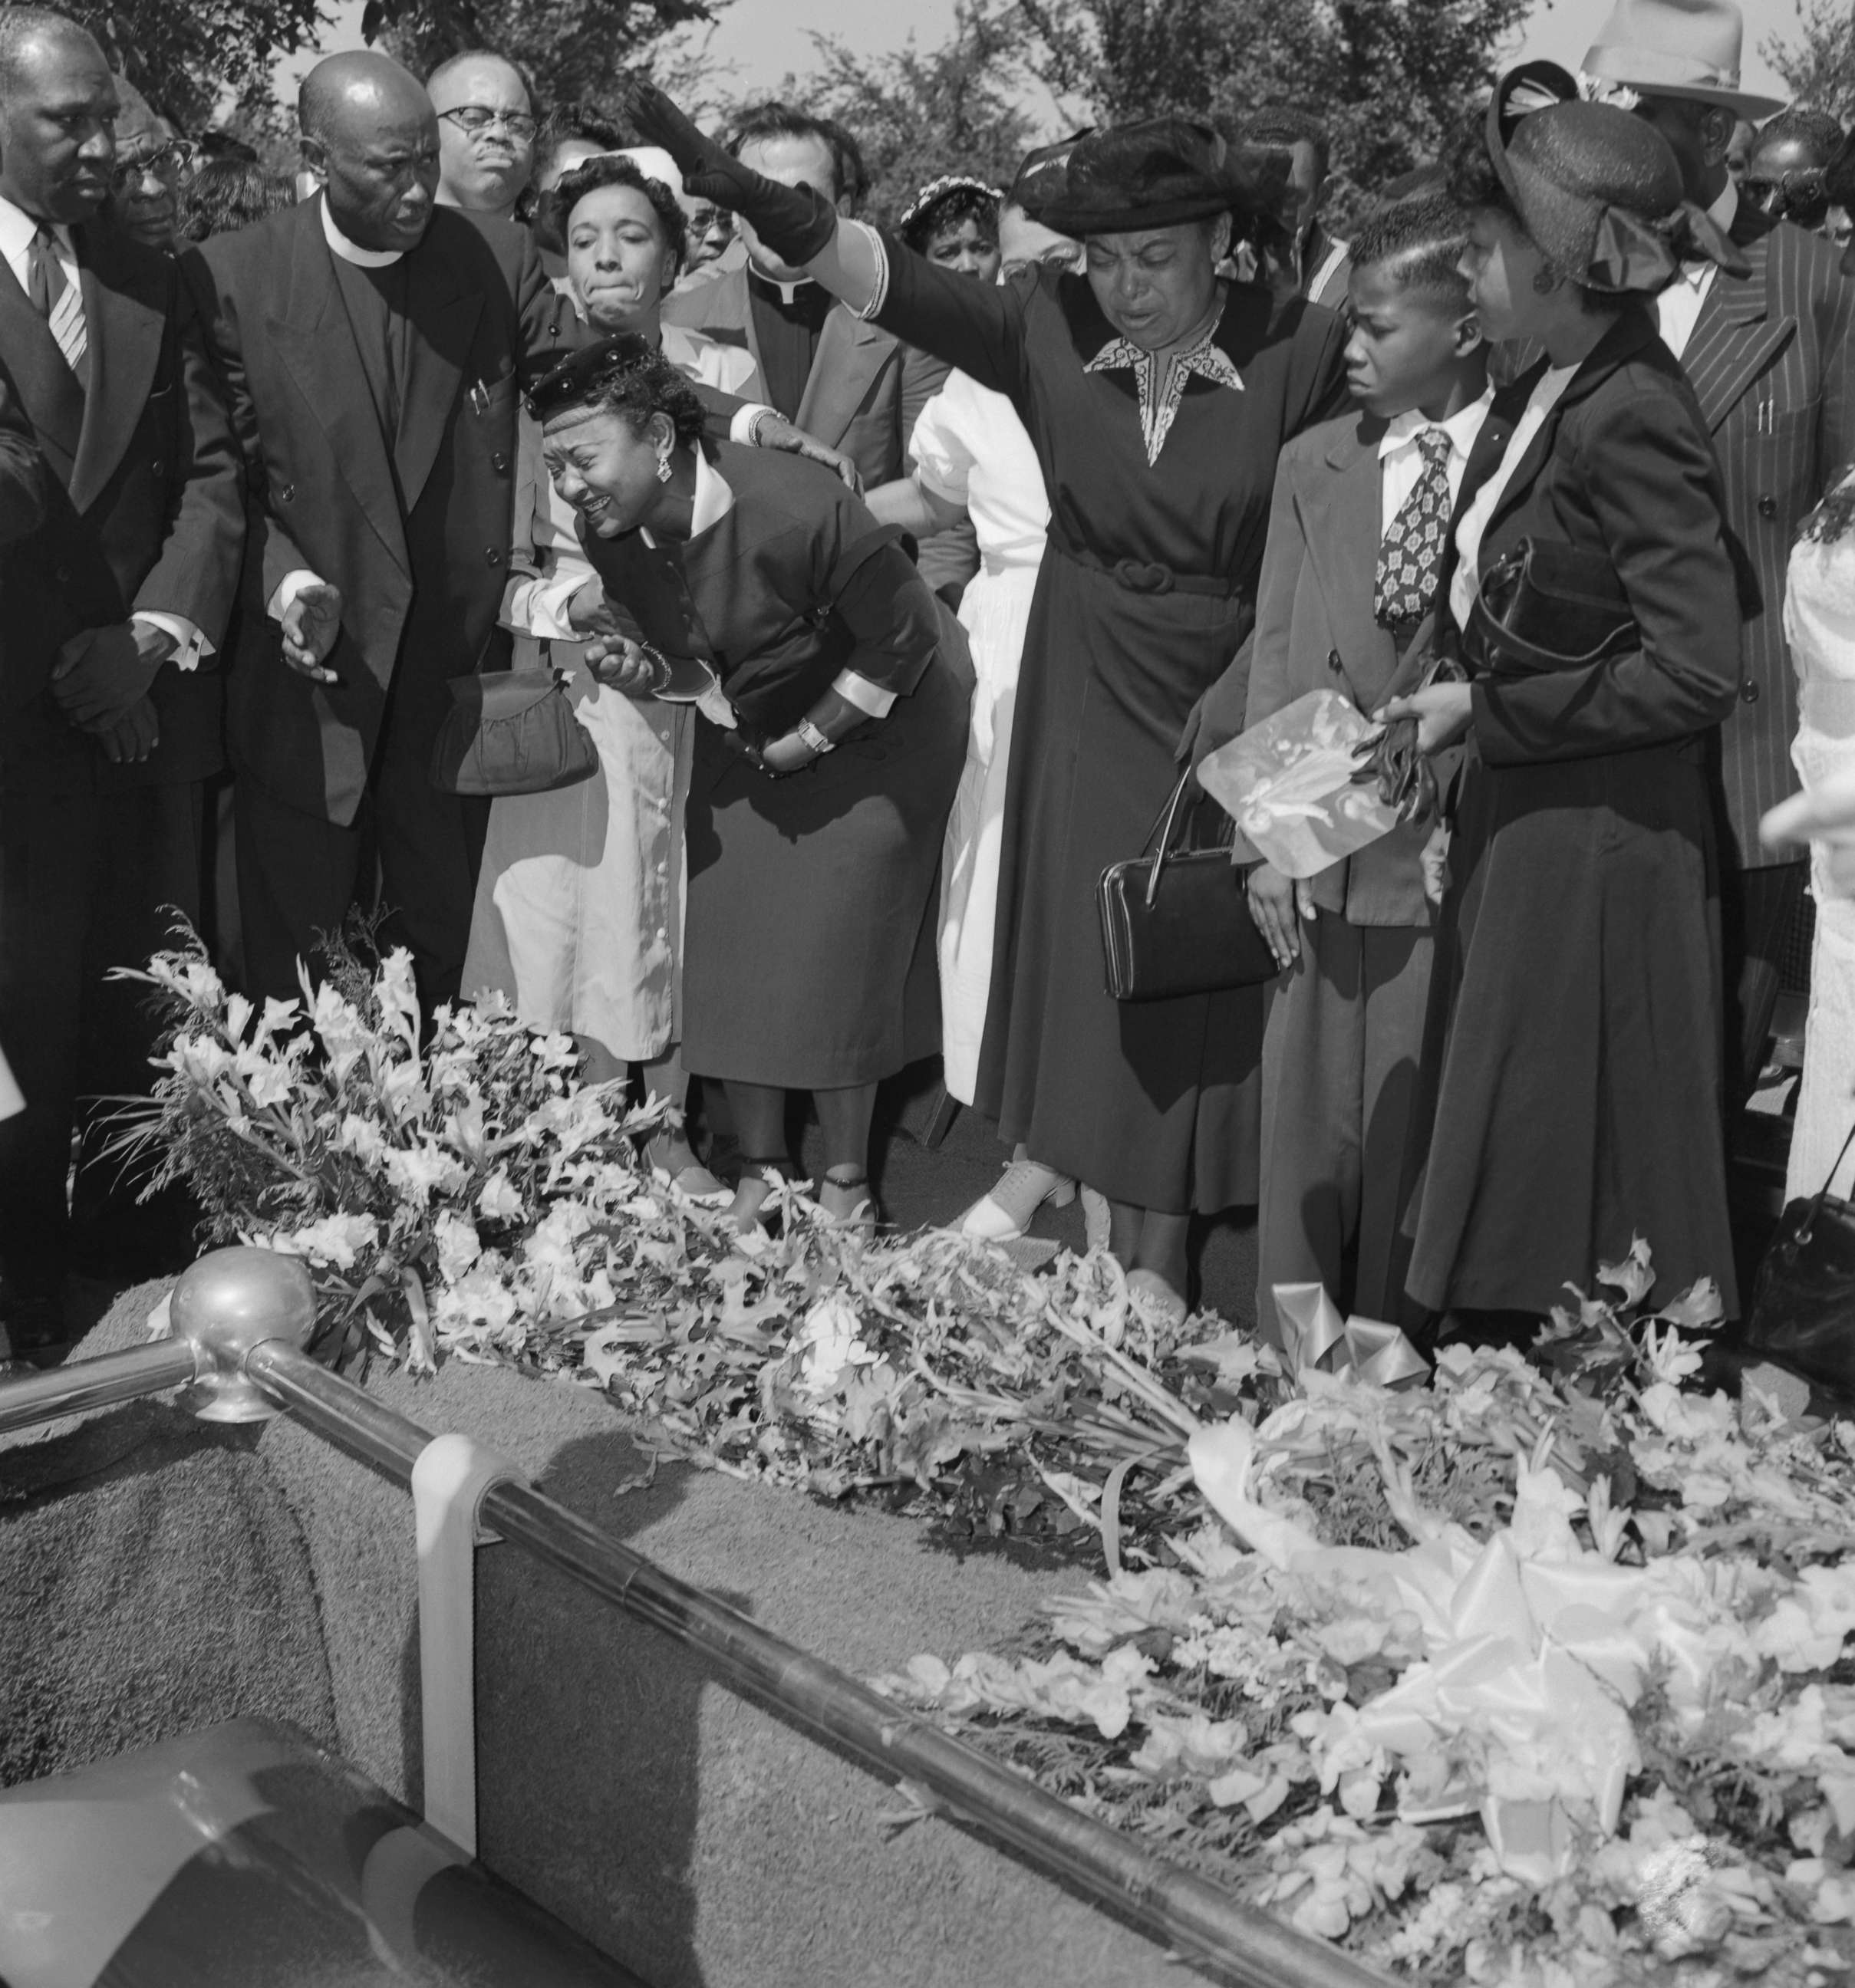 PHOTO: Friends restrain grief-stricken Mrs. Mamie Bradley as her son Emmett Till's body is lowered into the grave after a four day, open casket funeral.